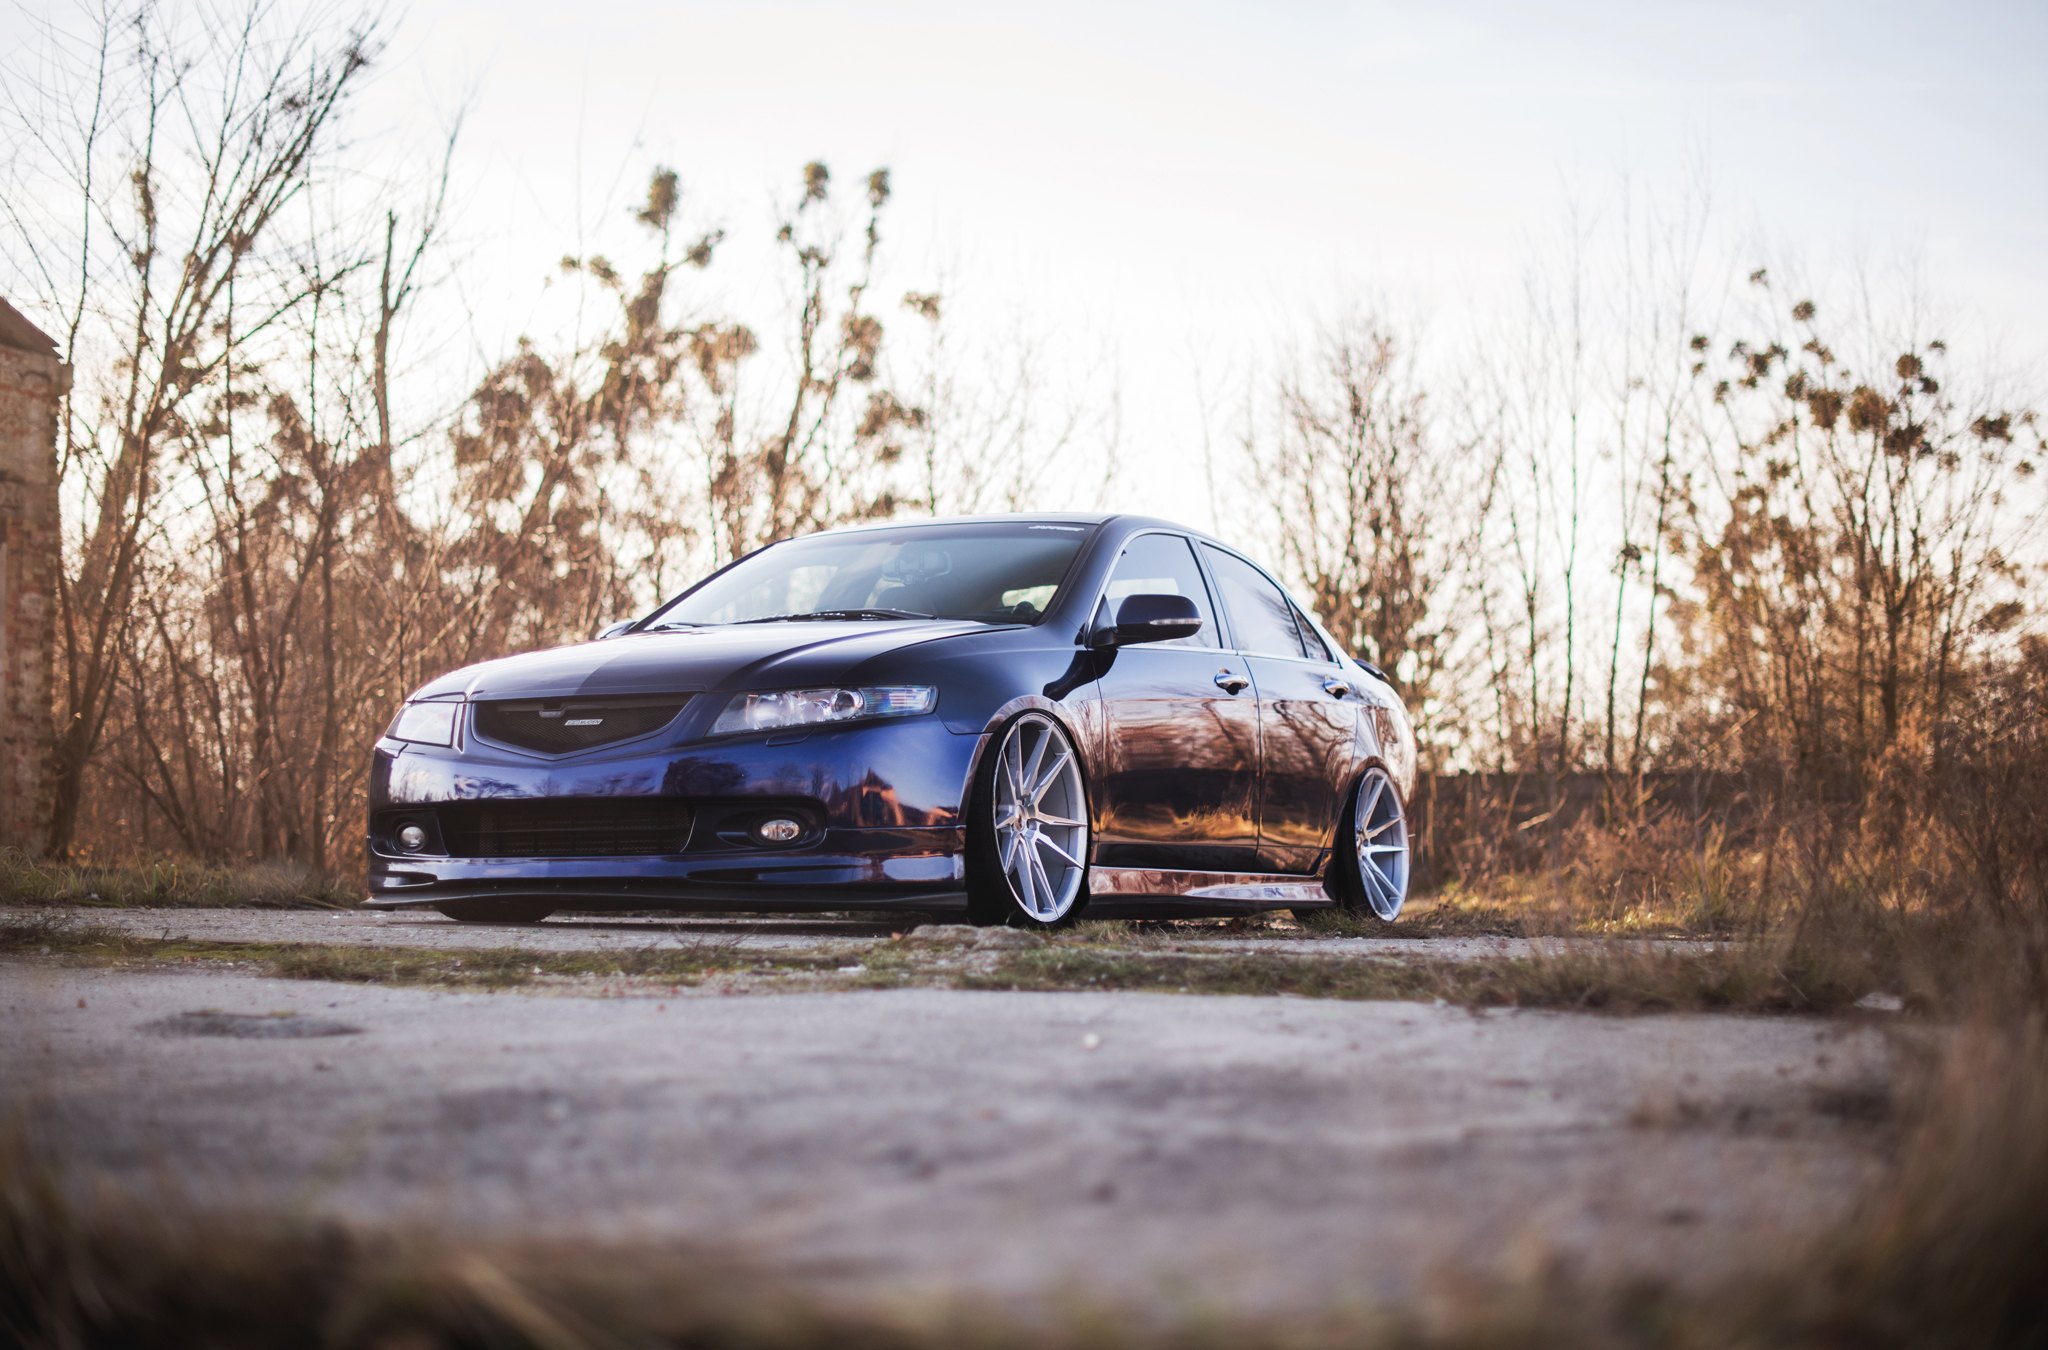 Front Bumper with Fog Lights on Blue Honda Accord - Photo by JR Wheels